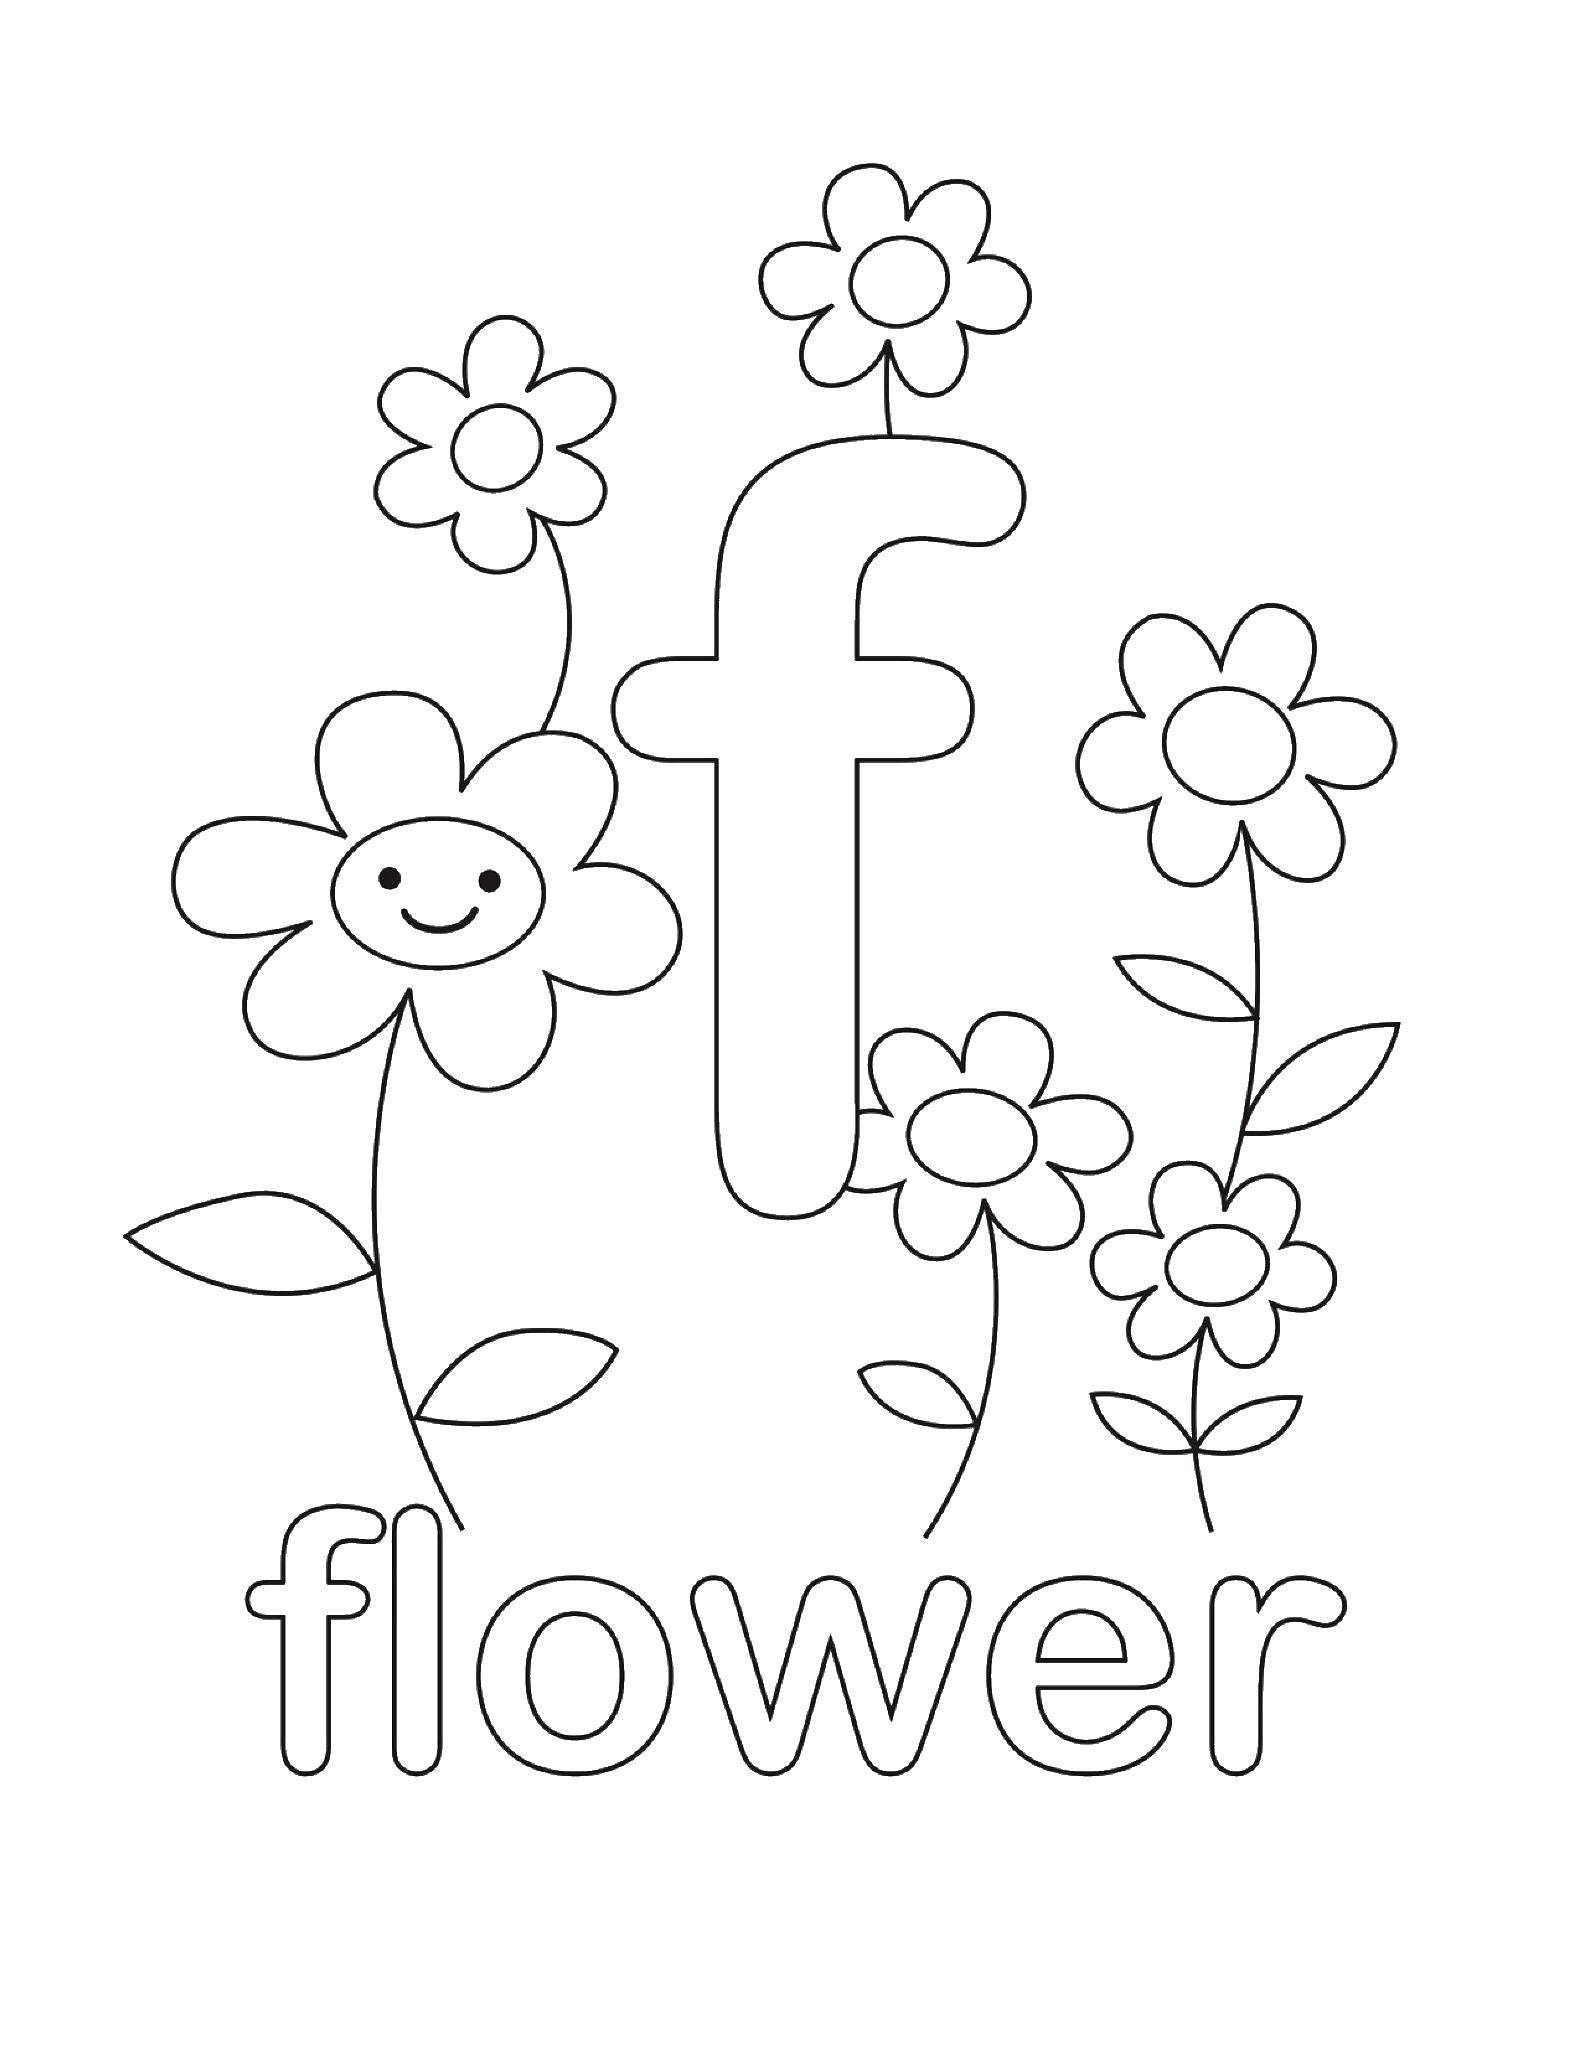 Coloring Flower. Category English words. Tags:  English words, flower.